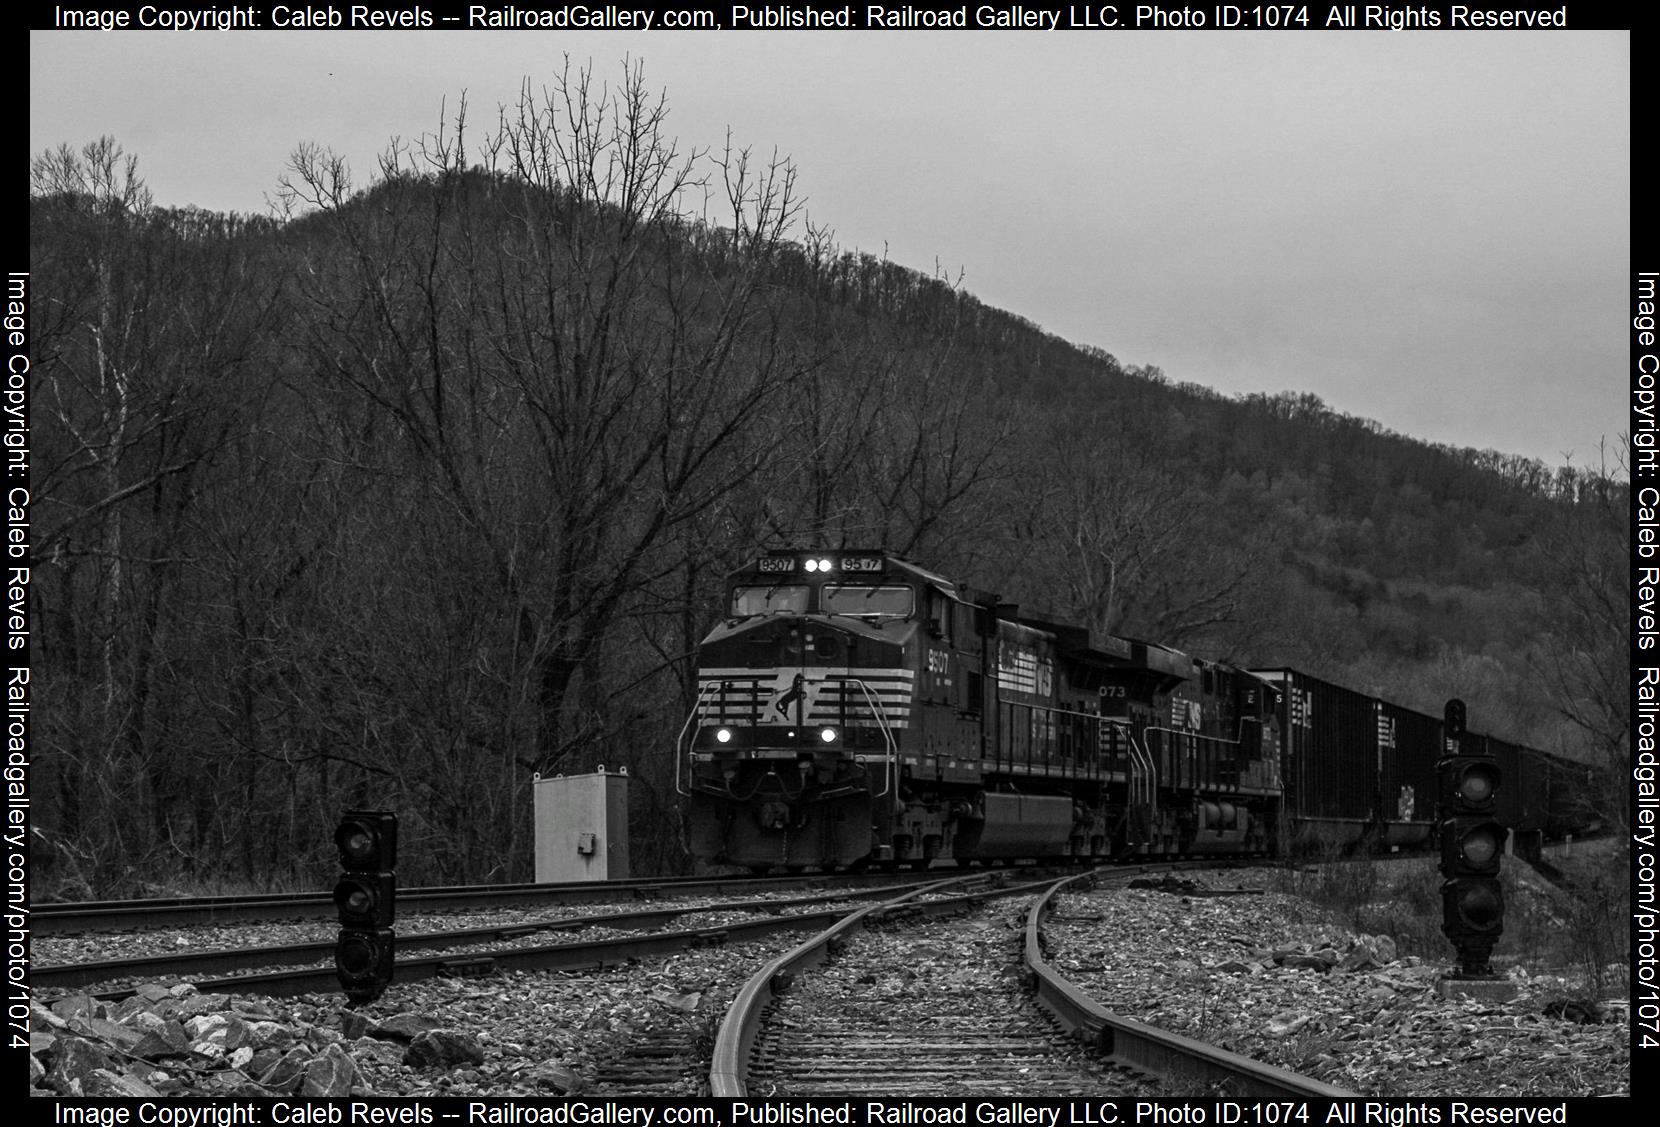 NS 9507 is a class GE C44-9W (Dash 9-44CW) and  is pictured in Black Mountain , North Carolina, USA.  This was taken along the Norfolk Southern S Line on the Norfolk Southern. Photo Copyright: Caleb Revels uploaded to Railroad Gallery on 05/16/2023. This photograph of NS 9507 was taken on Monday, April 03, 2023. All Rights Reserved. 